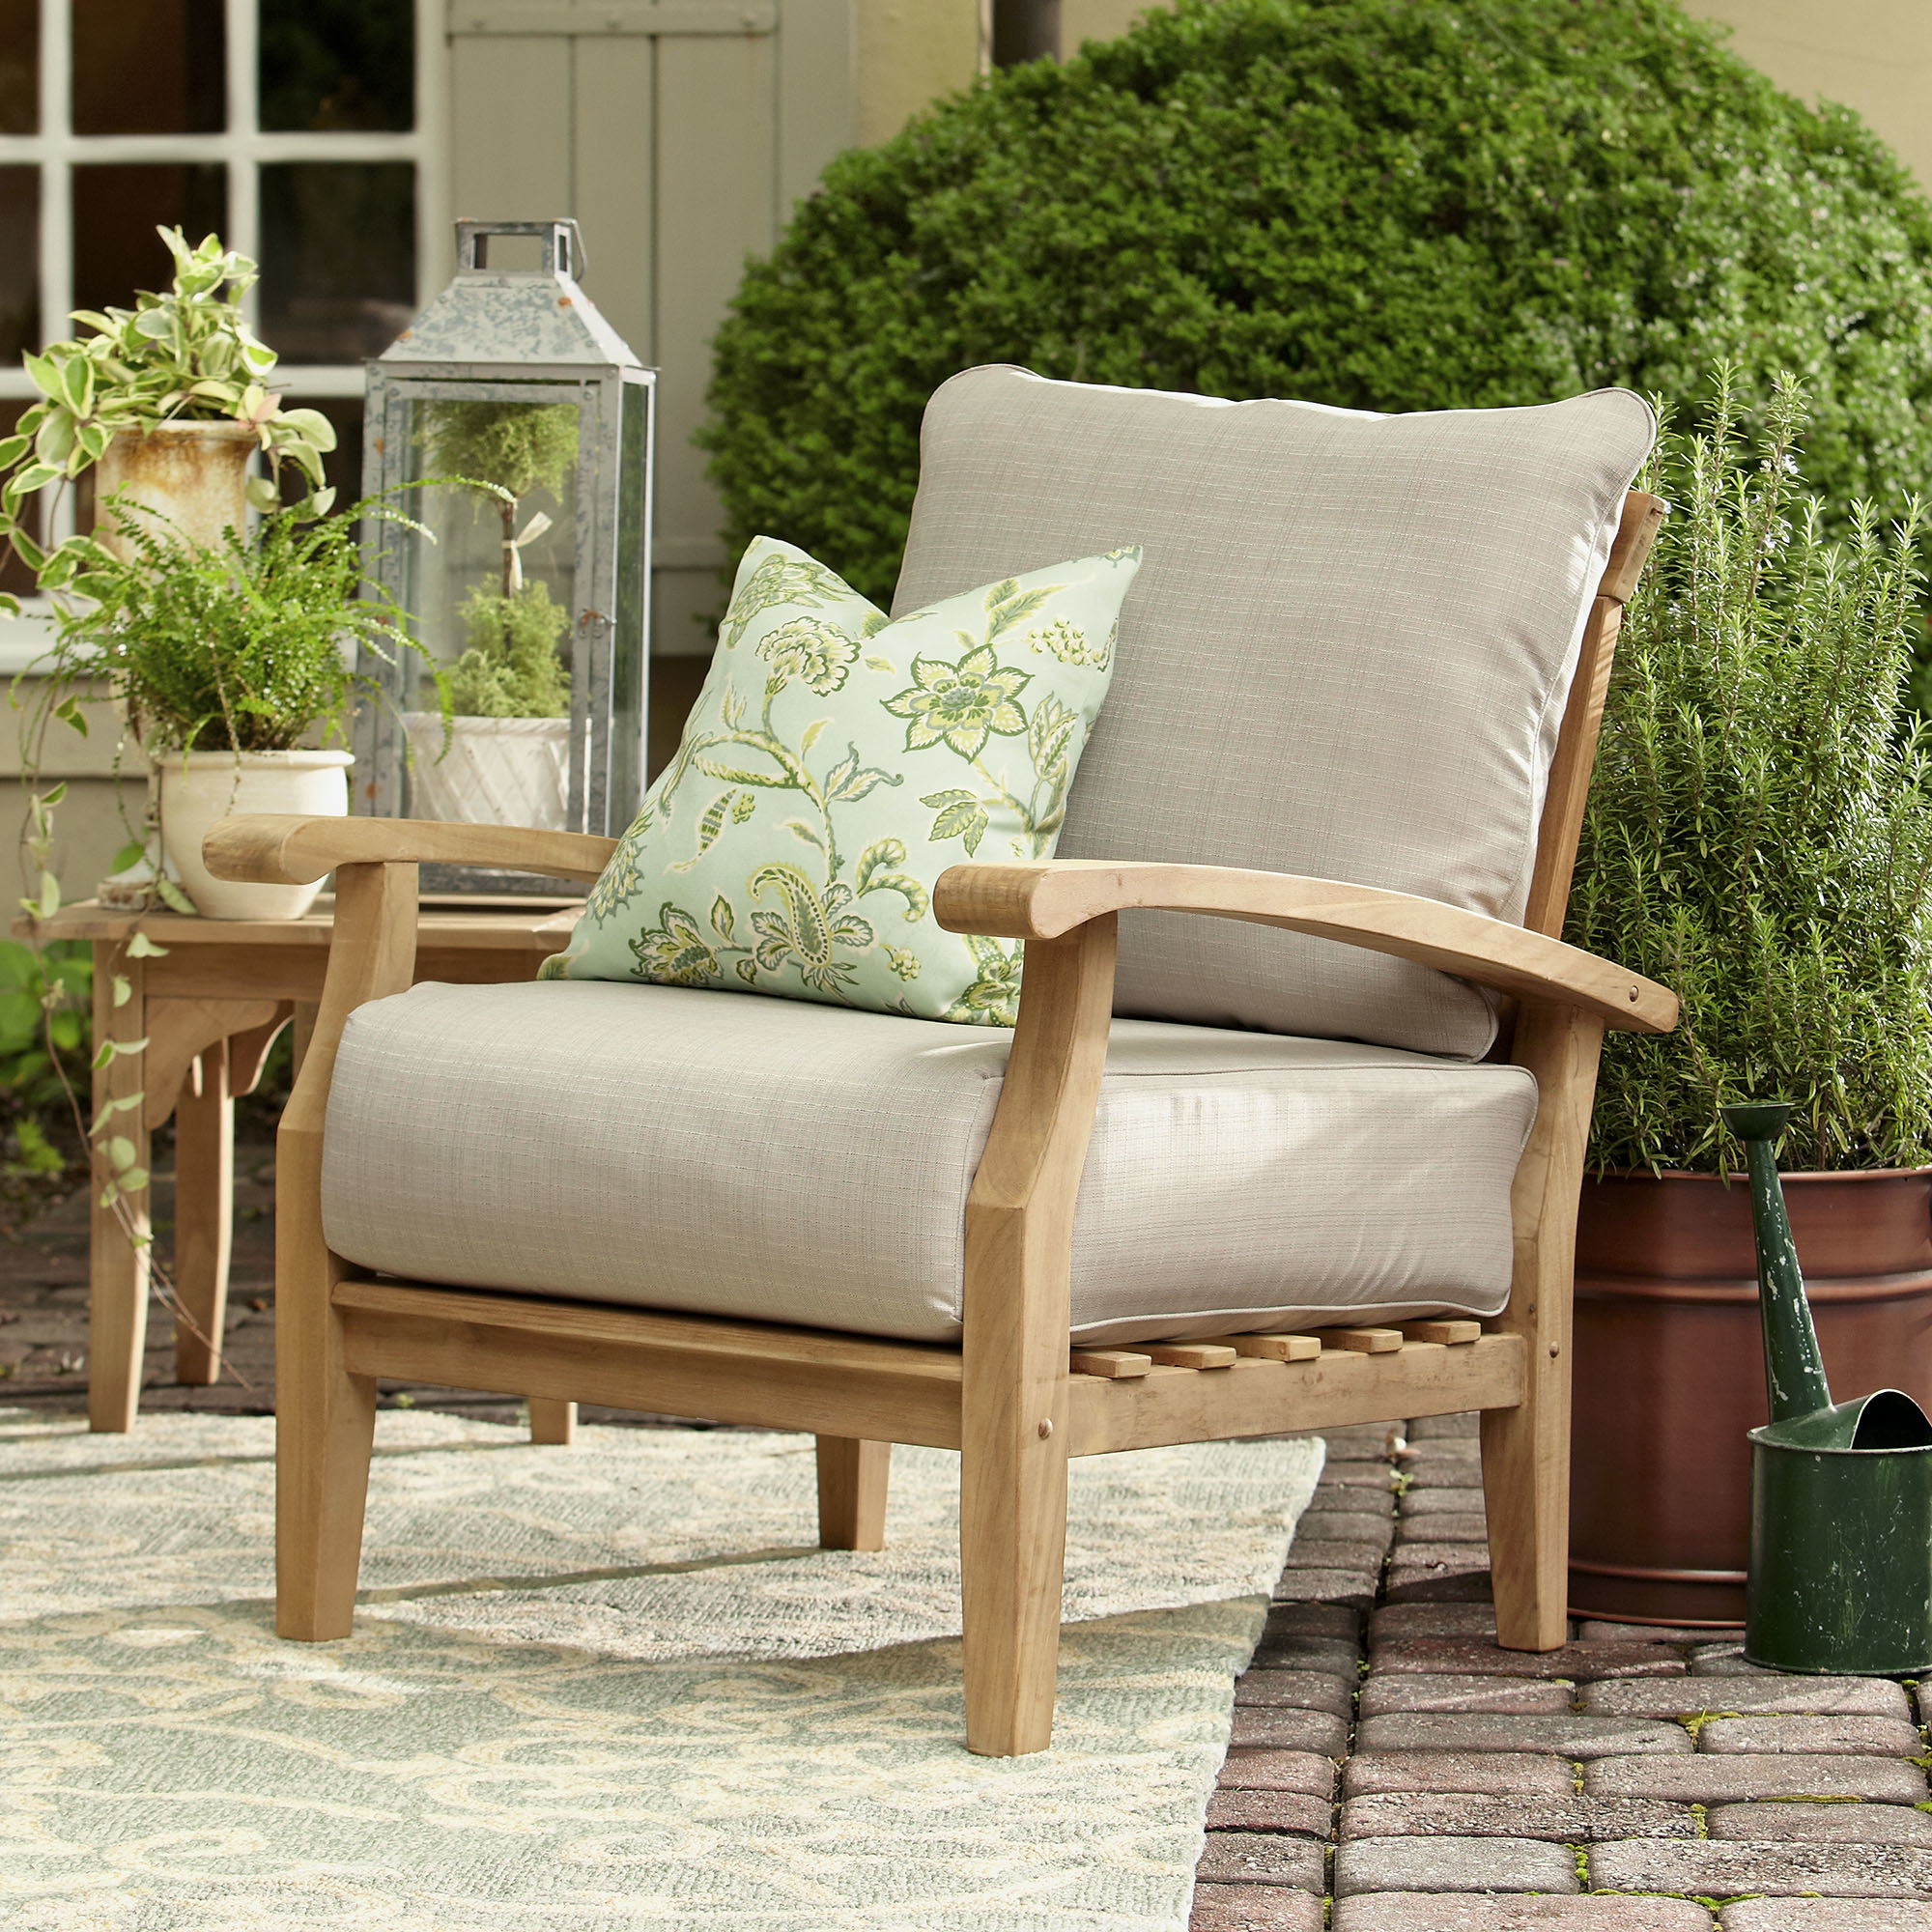 Enhance Your Outdoor Living With Teak Furniture